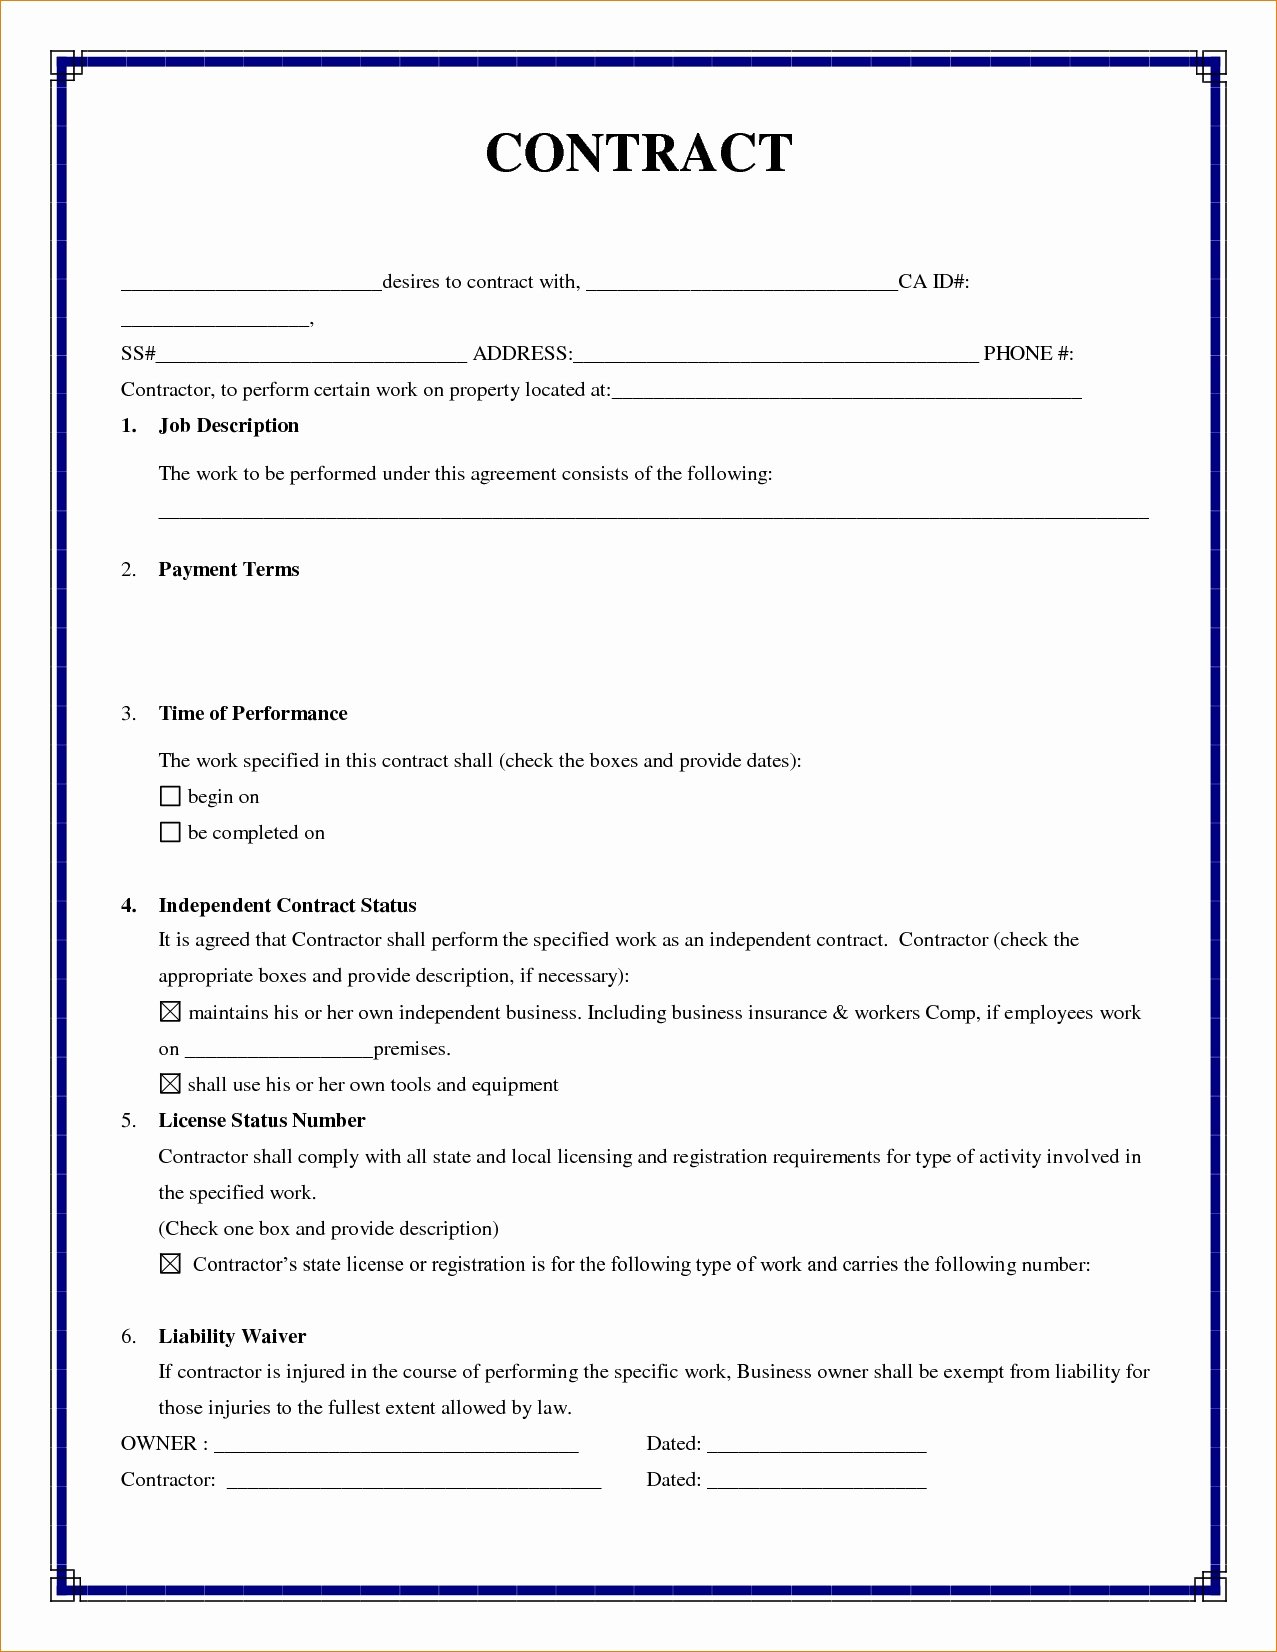 Simple Independent Contractor Agreement Template Inspirational Simple Contract Agreement